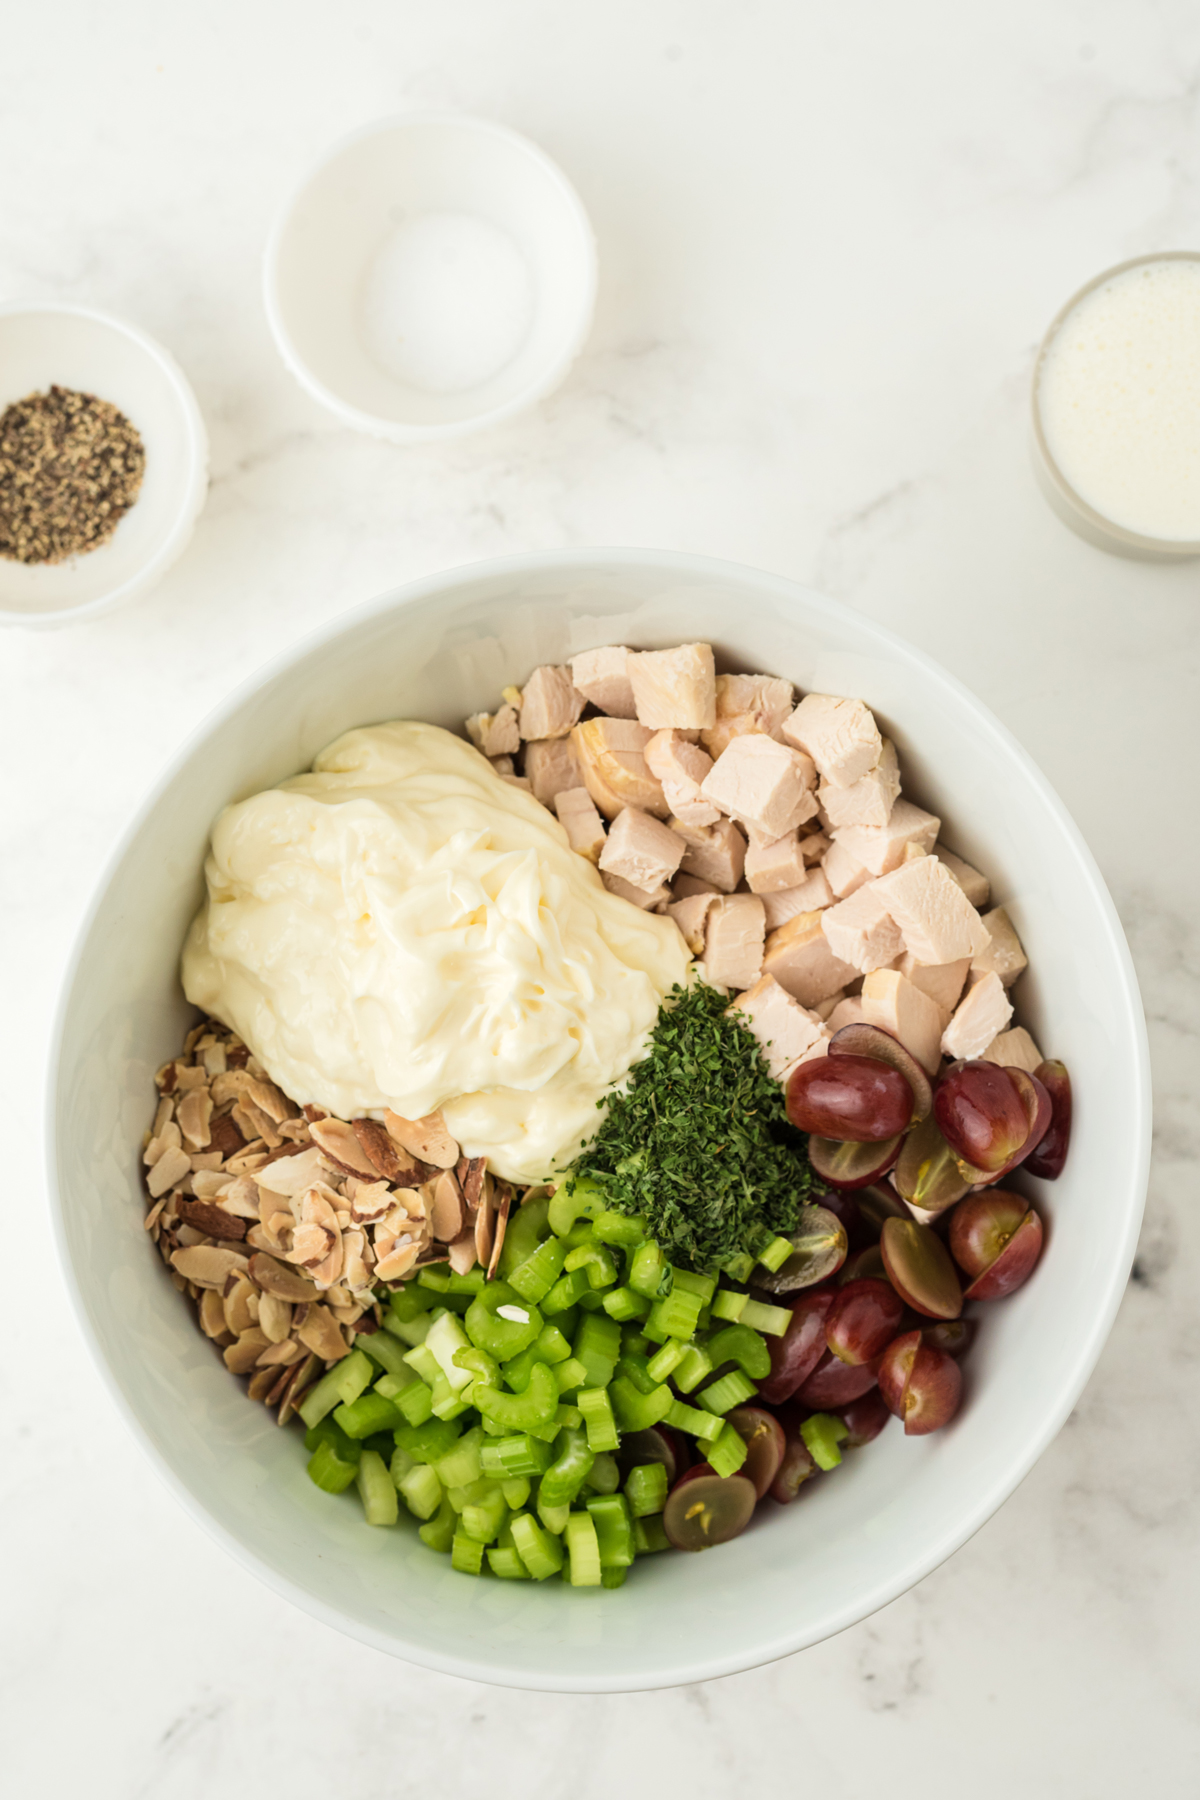 Combining all ingredients of Neiman Marcus Chicken Salad in a white bowl.